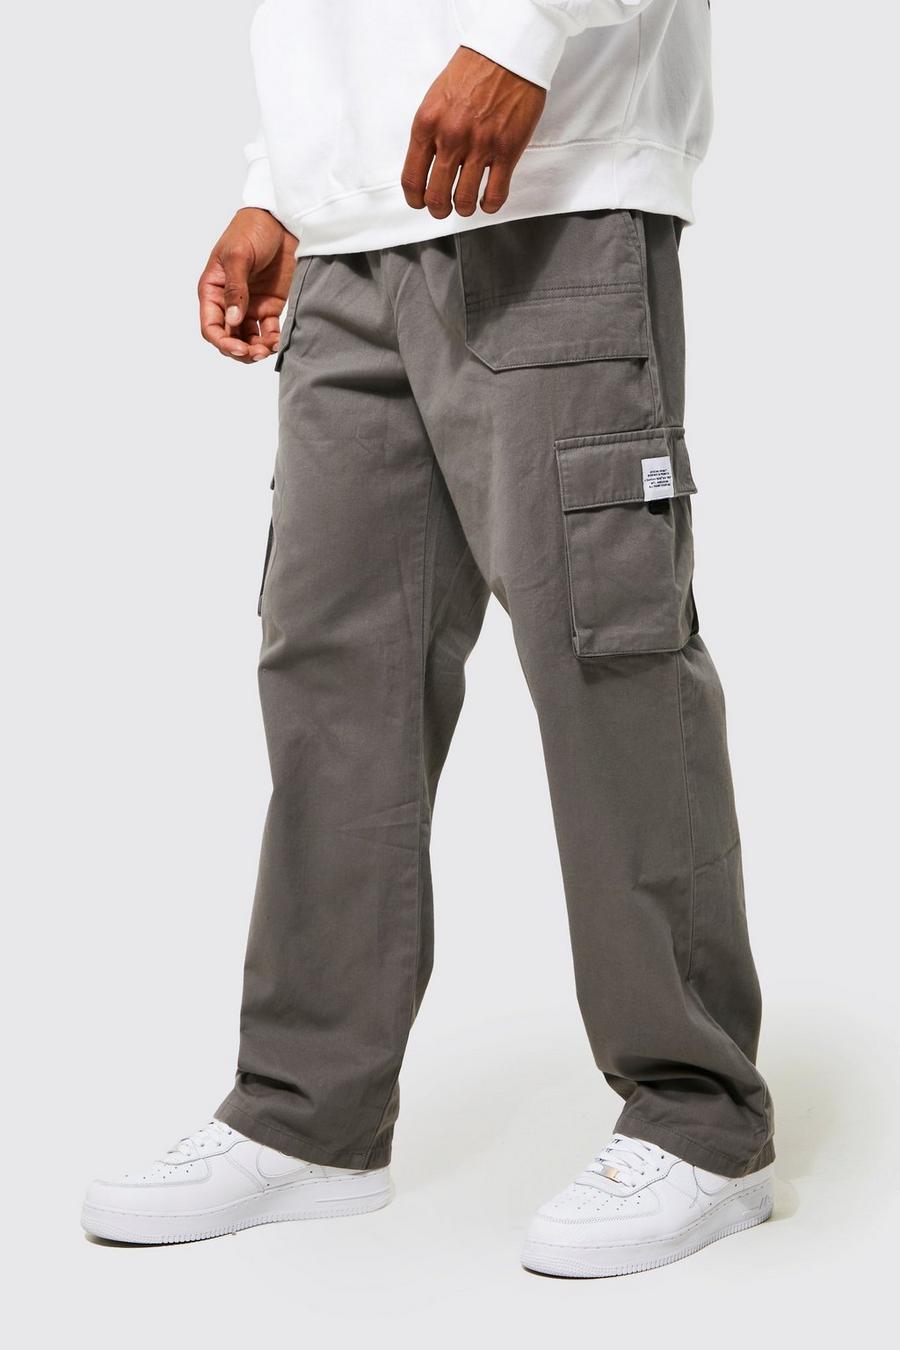 Slate Elasticated Waist Relaxed Fit Buckle Cargo Trouser